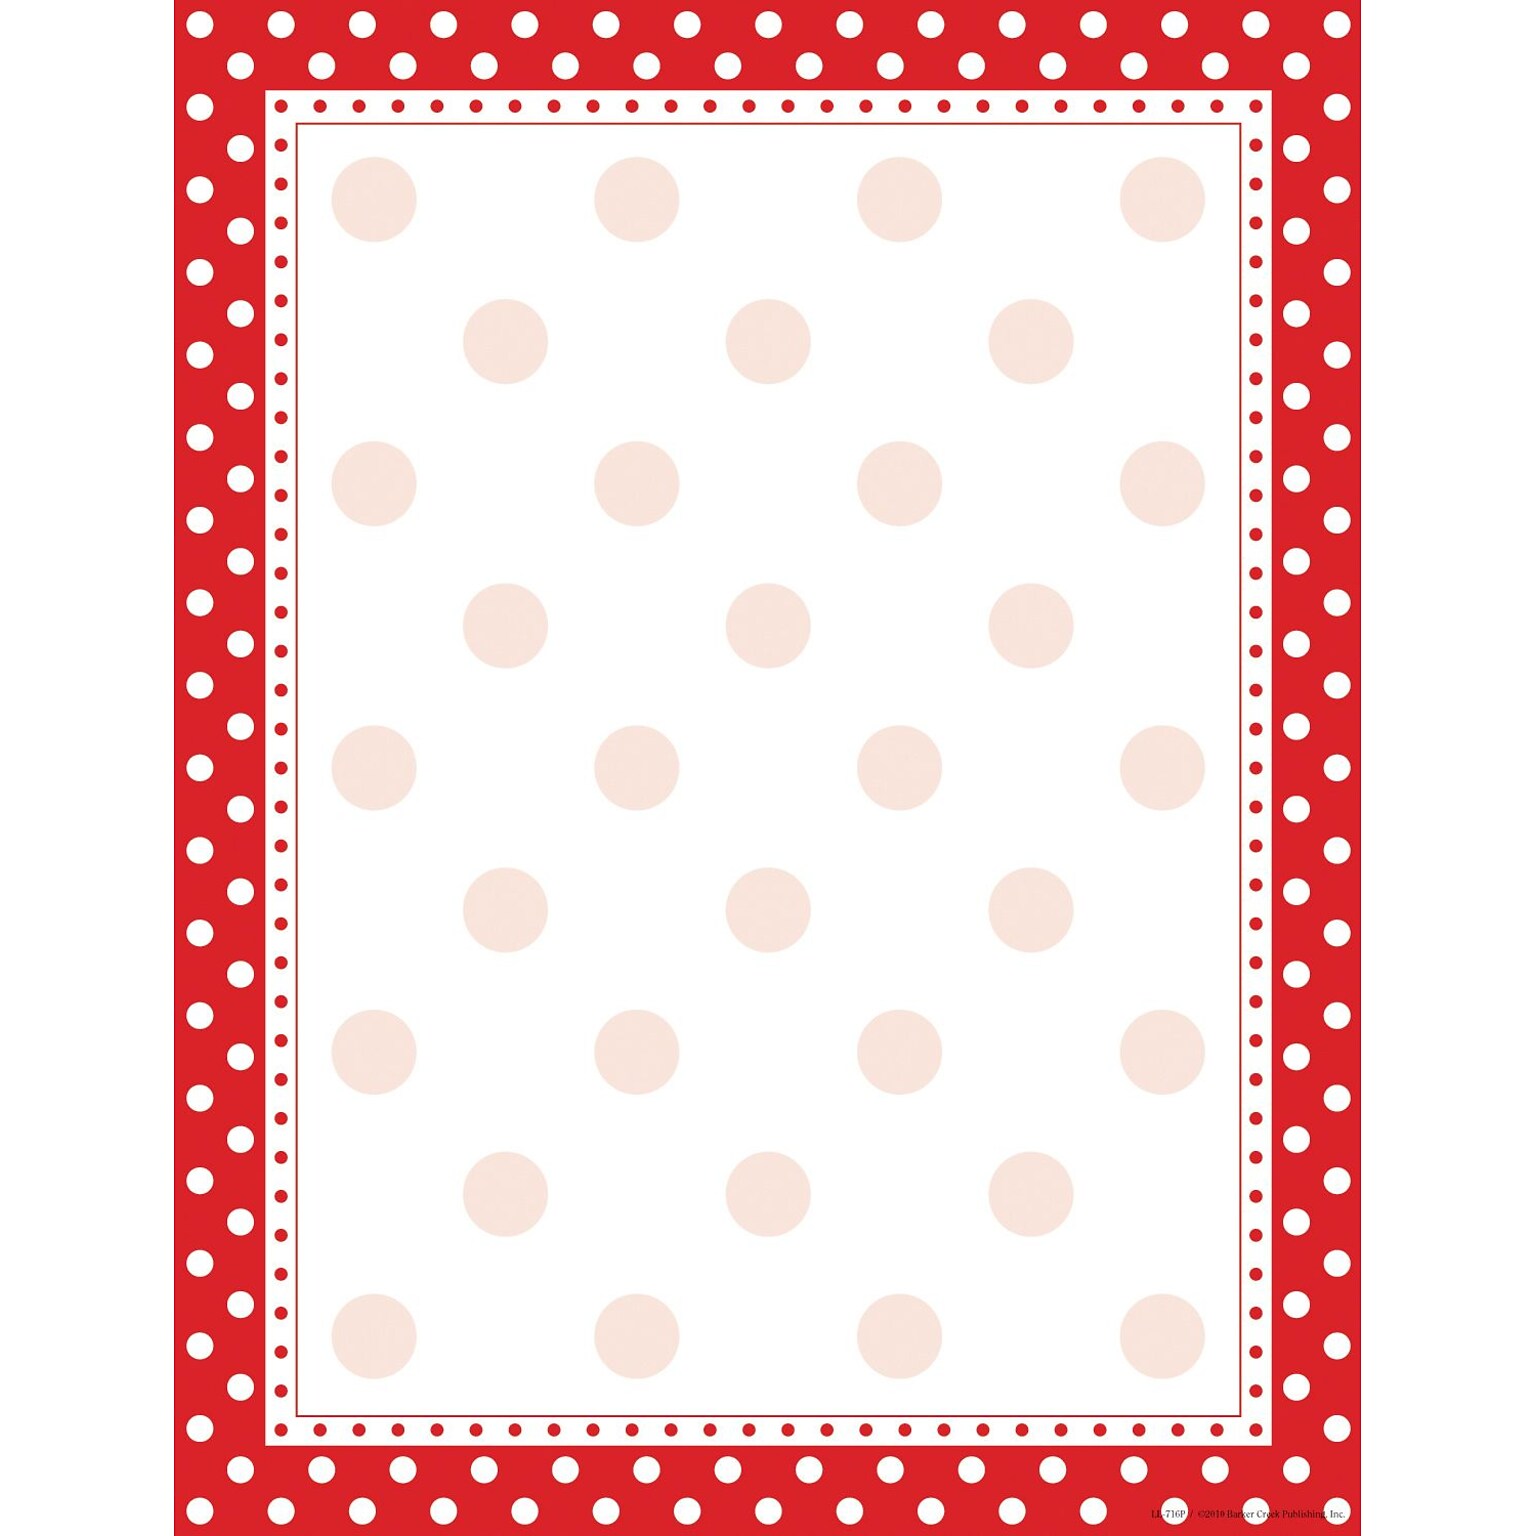 Barker Creek Red and White Dot Stationery